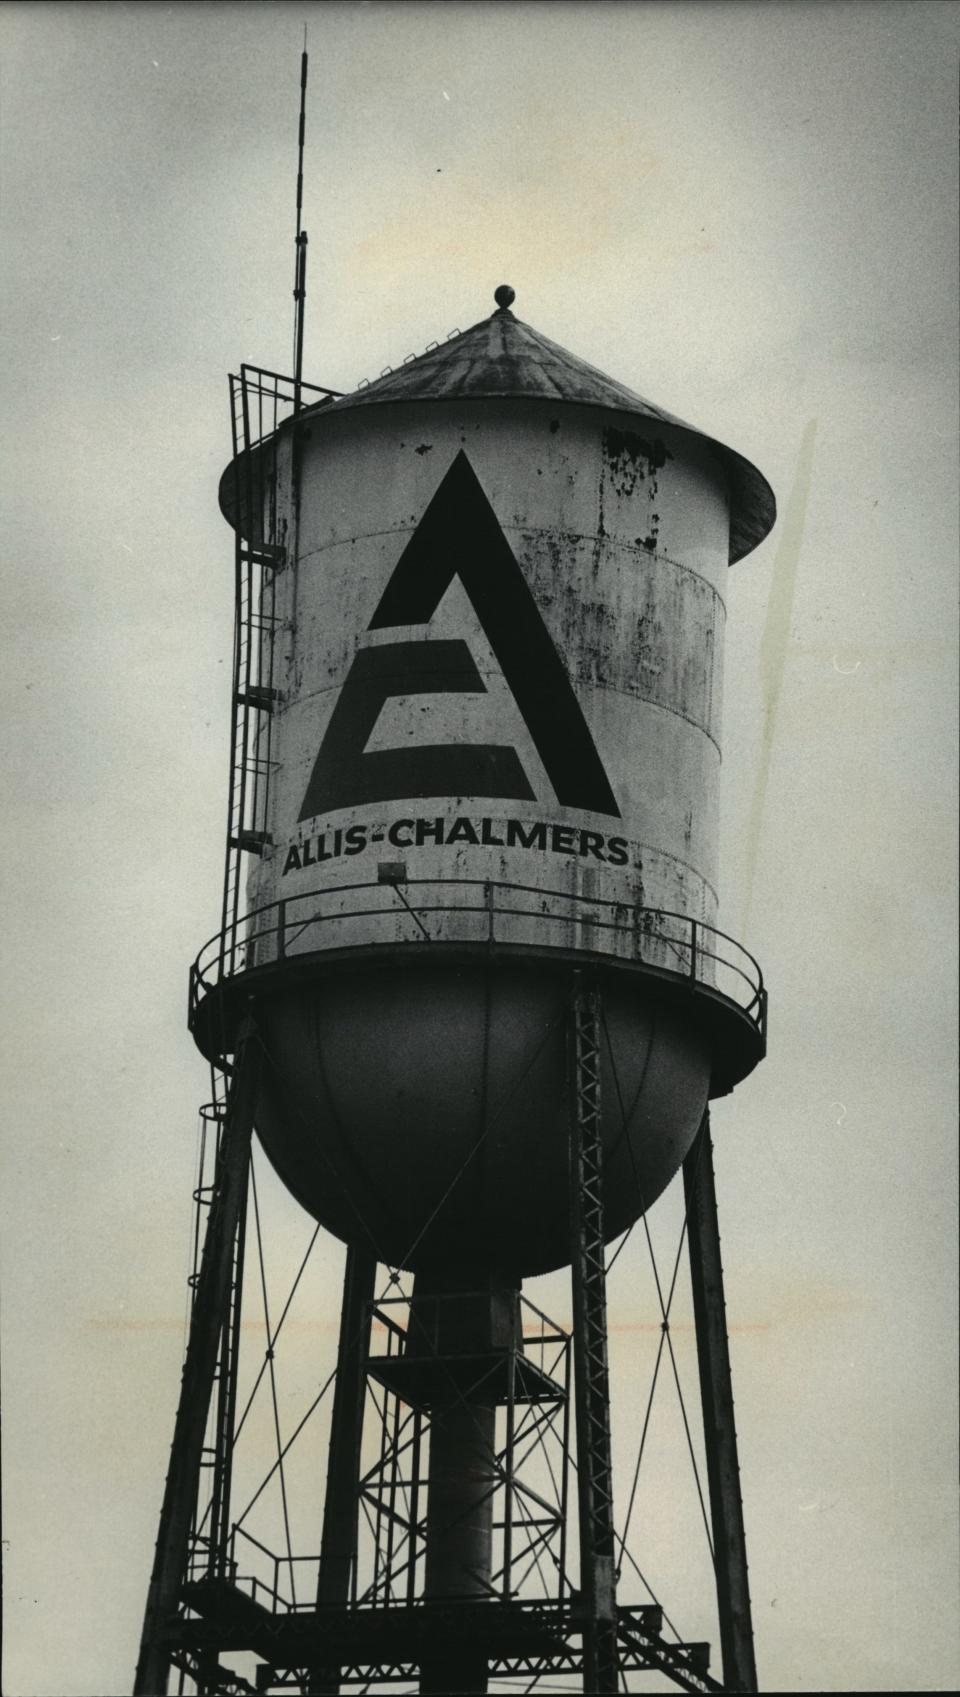 Allis-Chalmers' logo rises above West Allis in this 1985 photo.